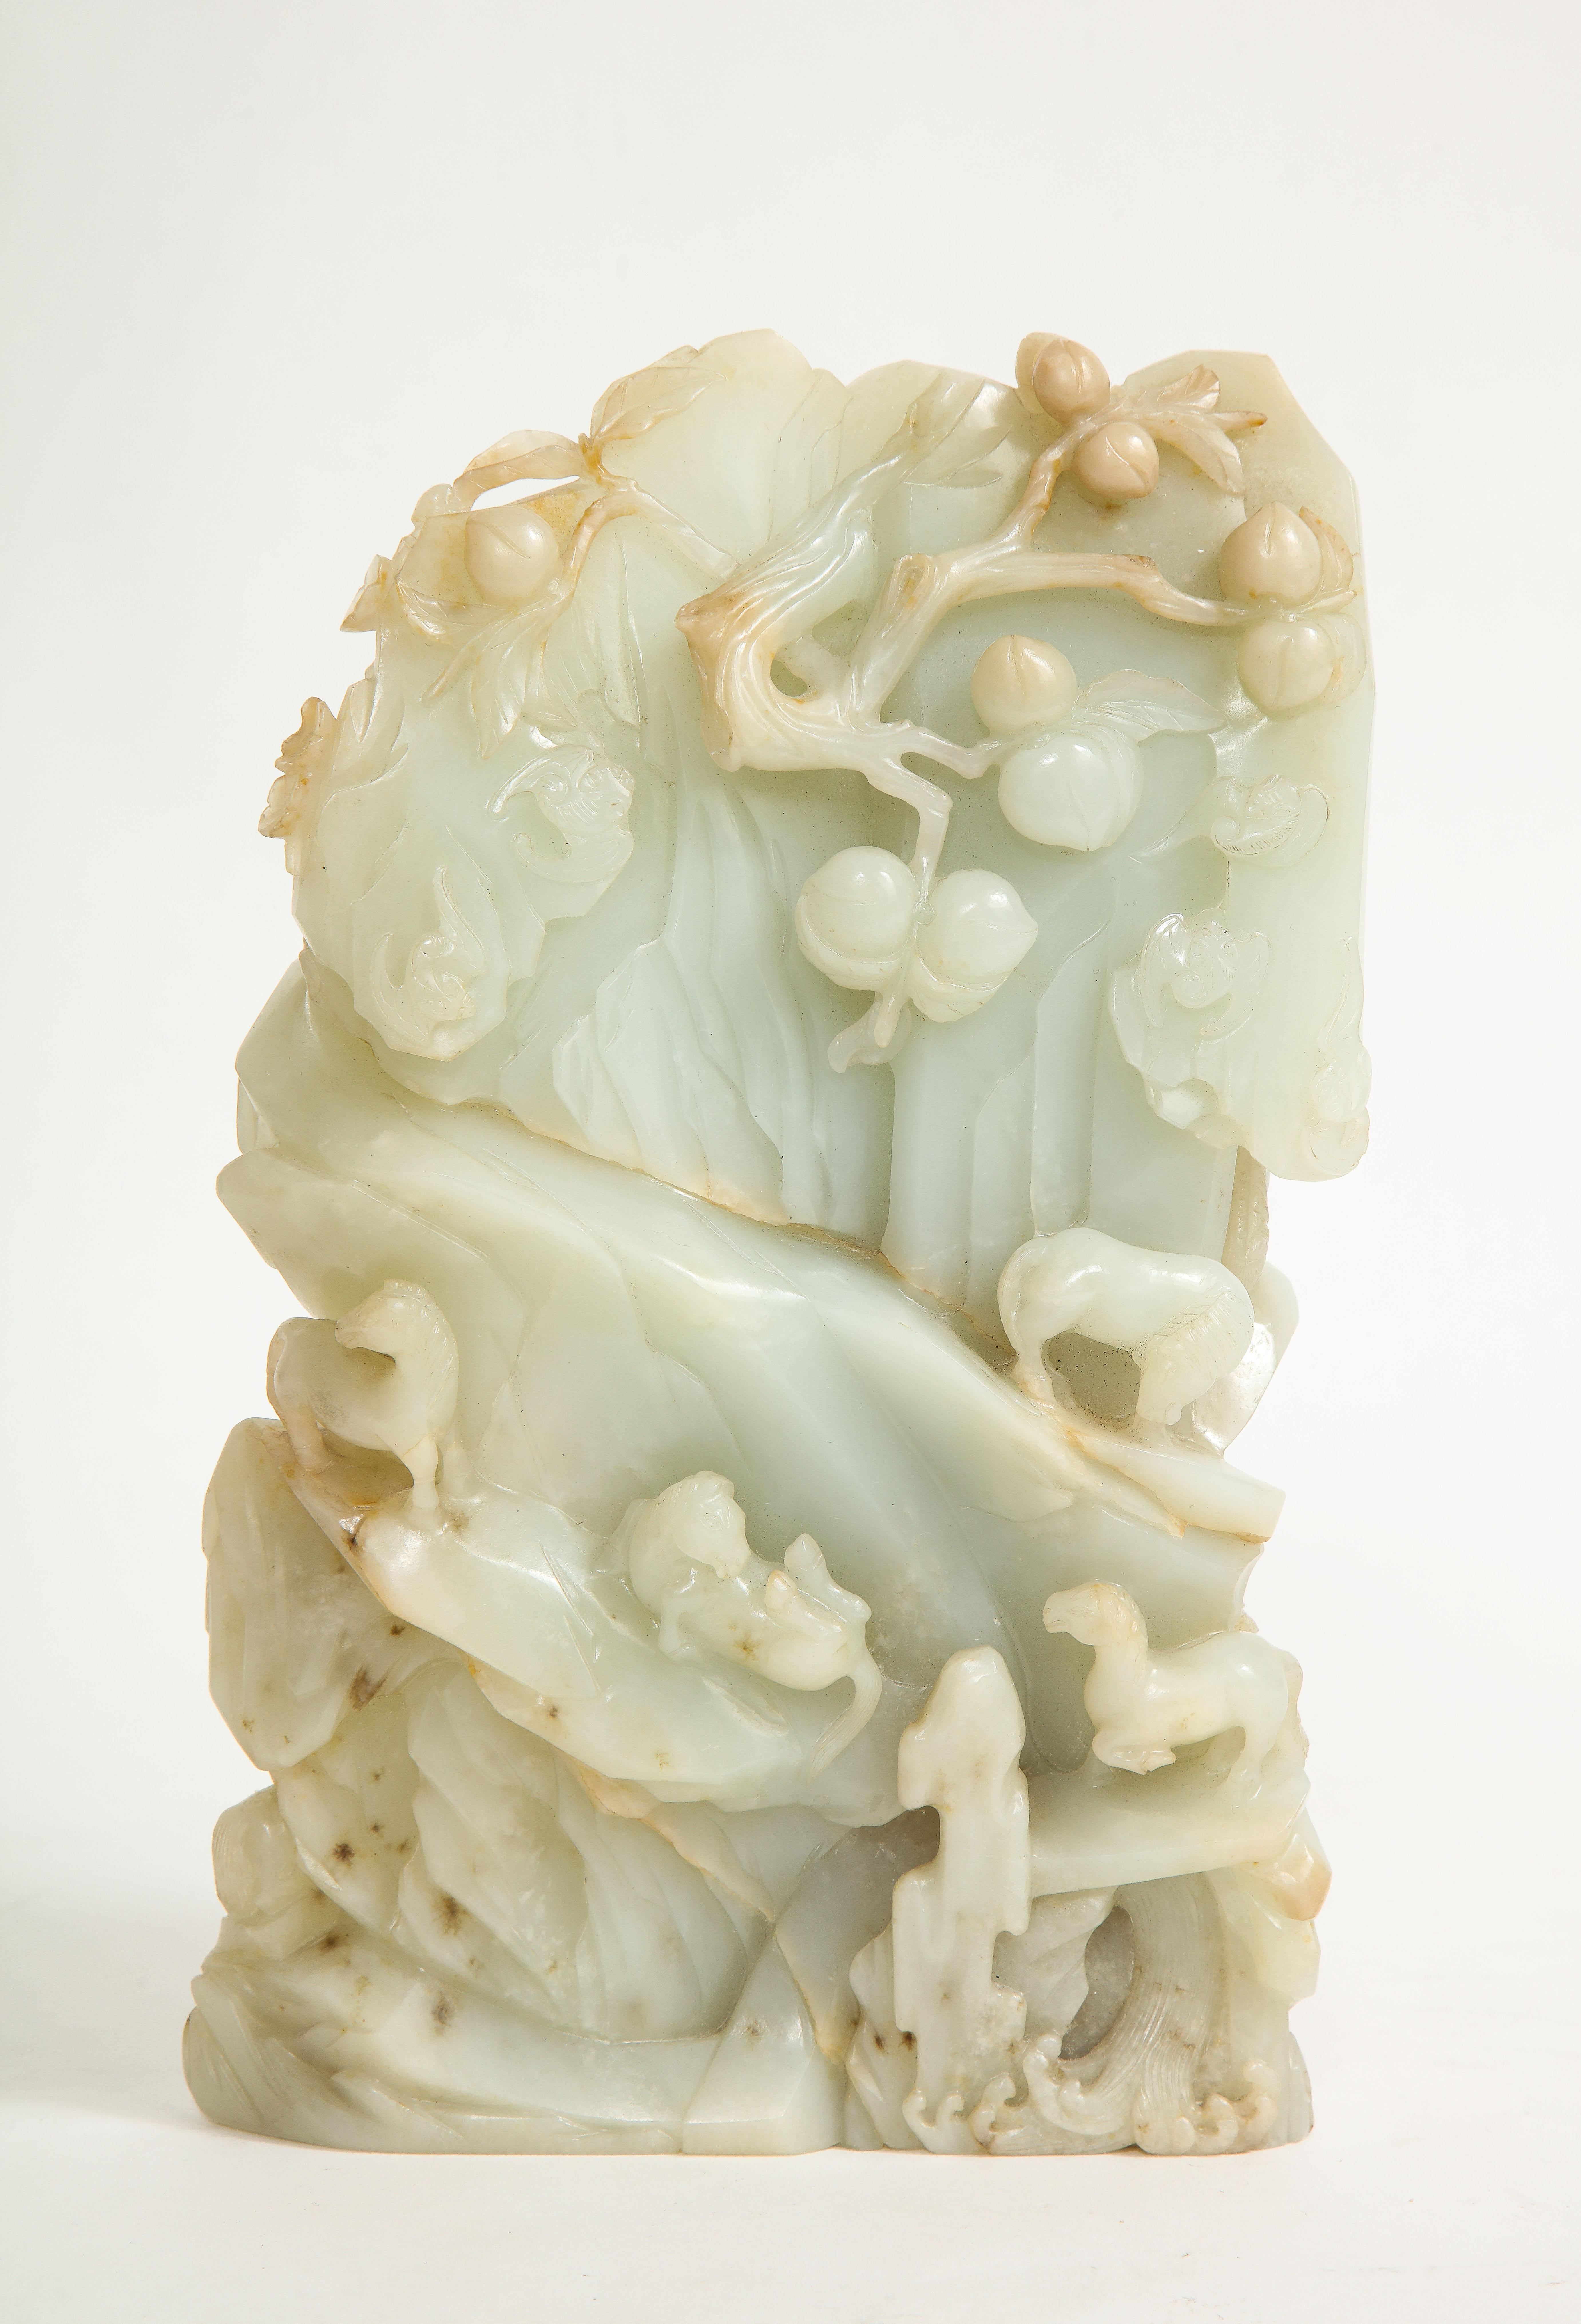 Qing Large 18th/19th C. Chinese Pale Celadon Jade High Relief Hand-Carved Mountain